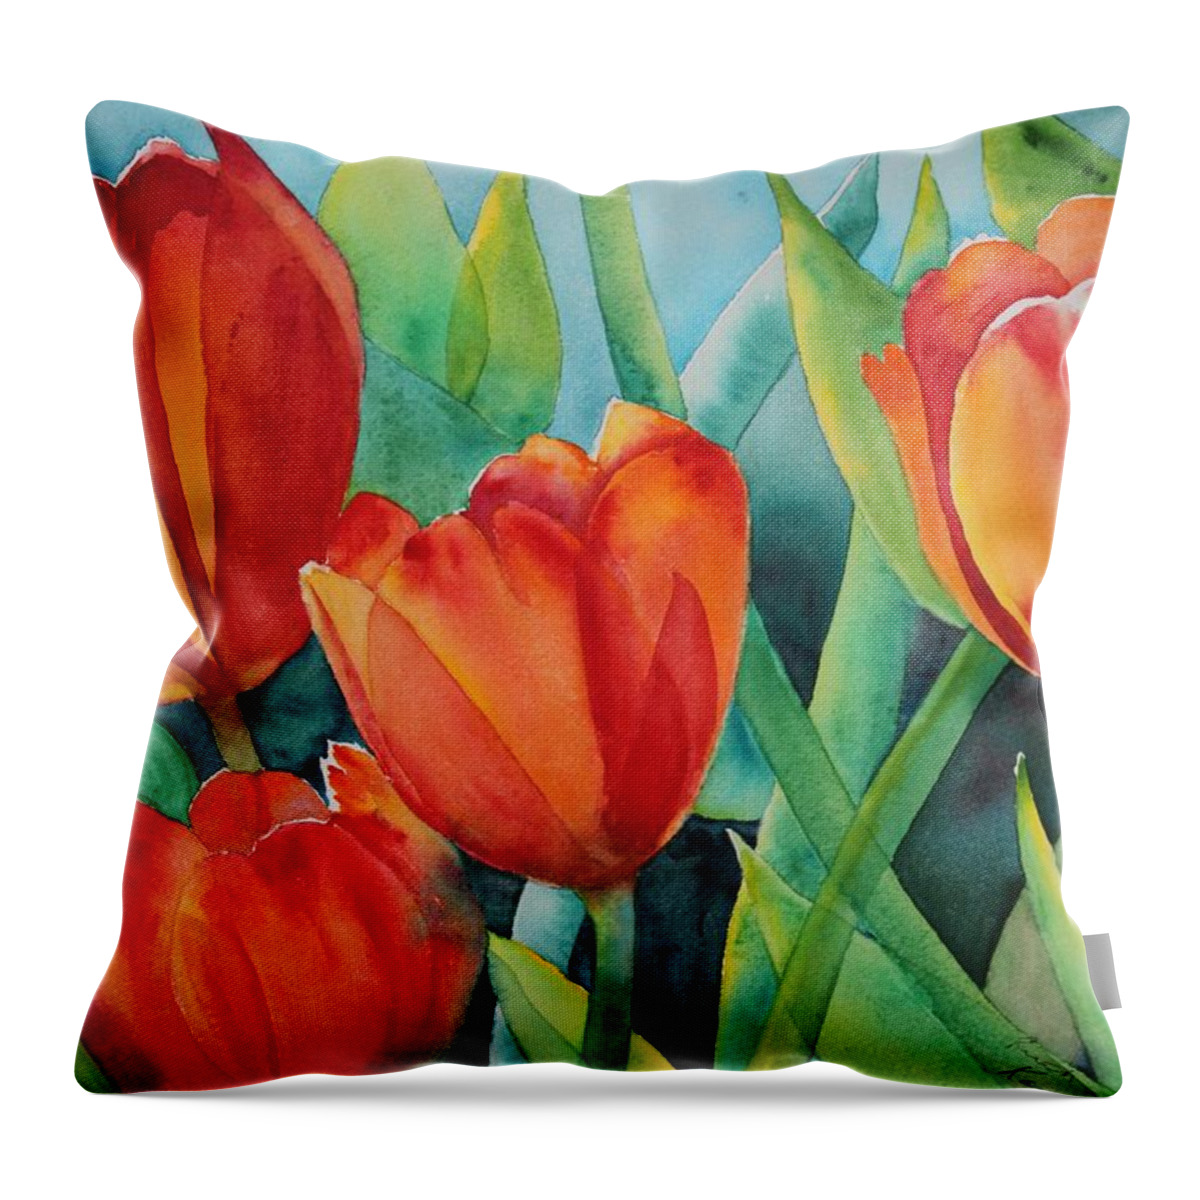 Red Flowers Throw Pillow featuring the painting 4 Red Tulips by Ruth Kamenev